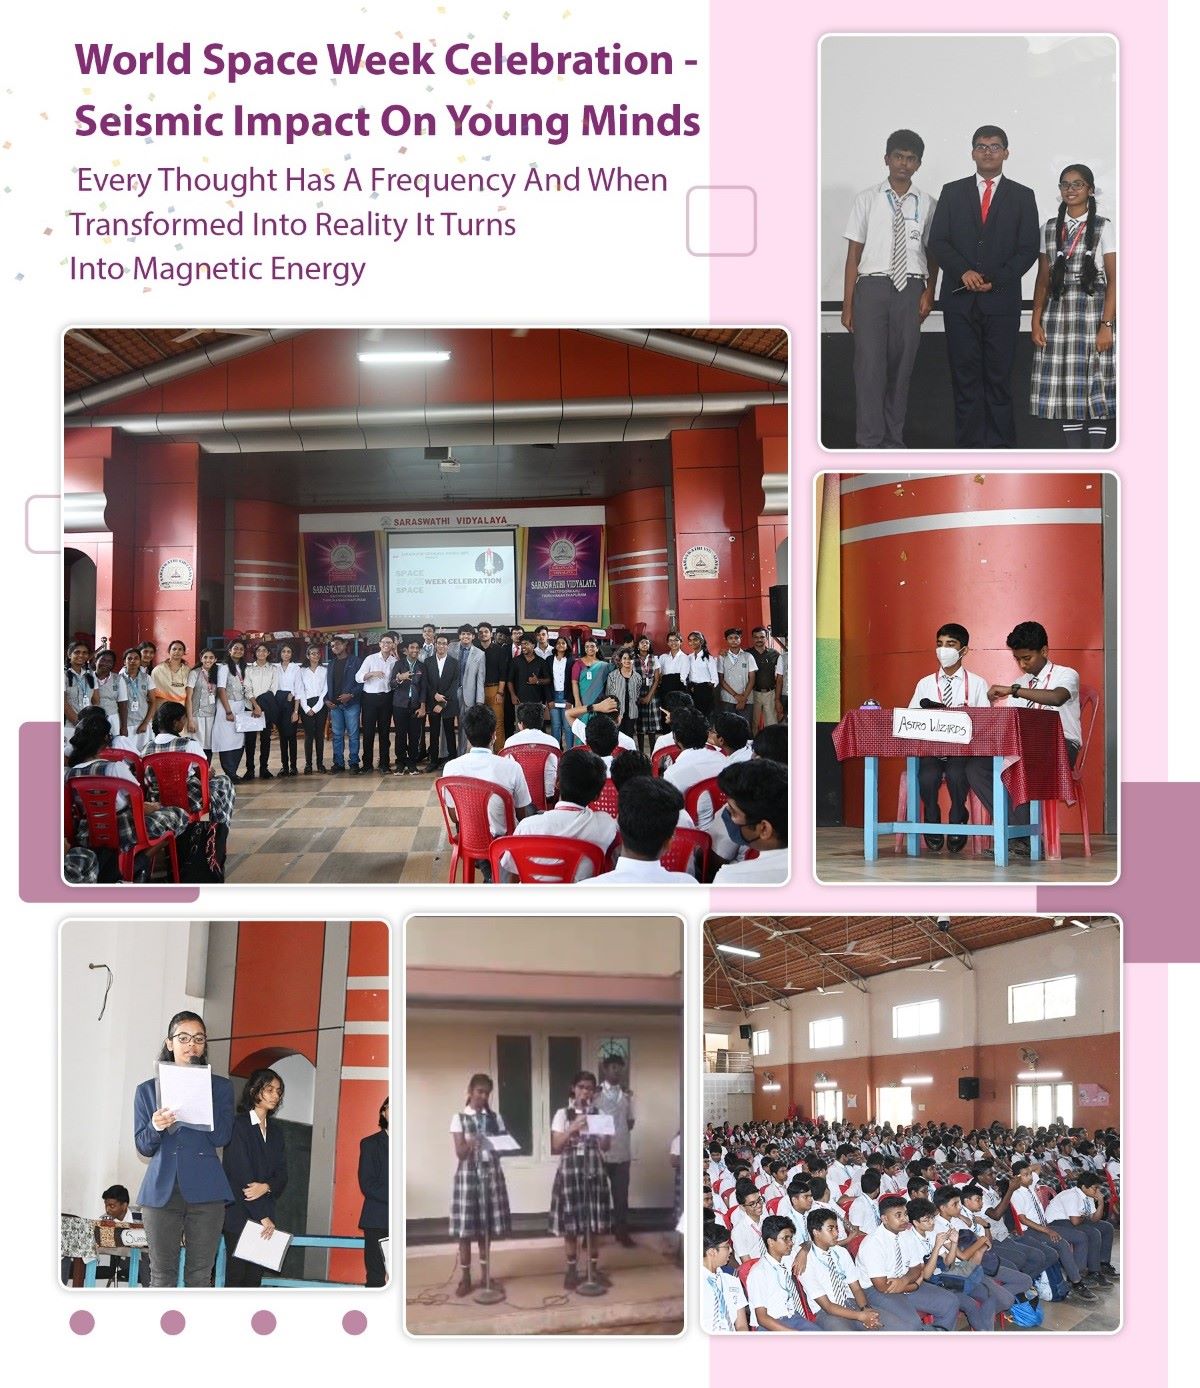 World Space Week Celebration - Seismic Impact On Young Minds